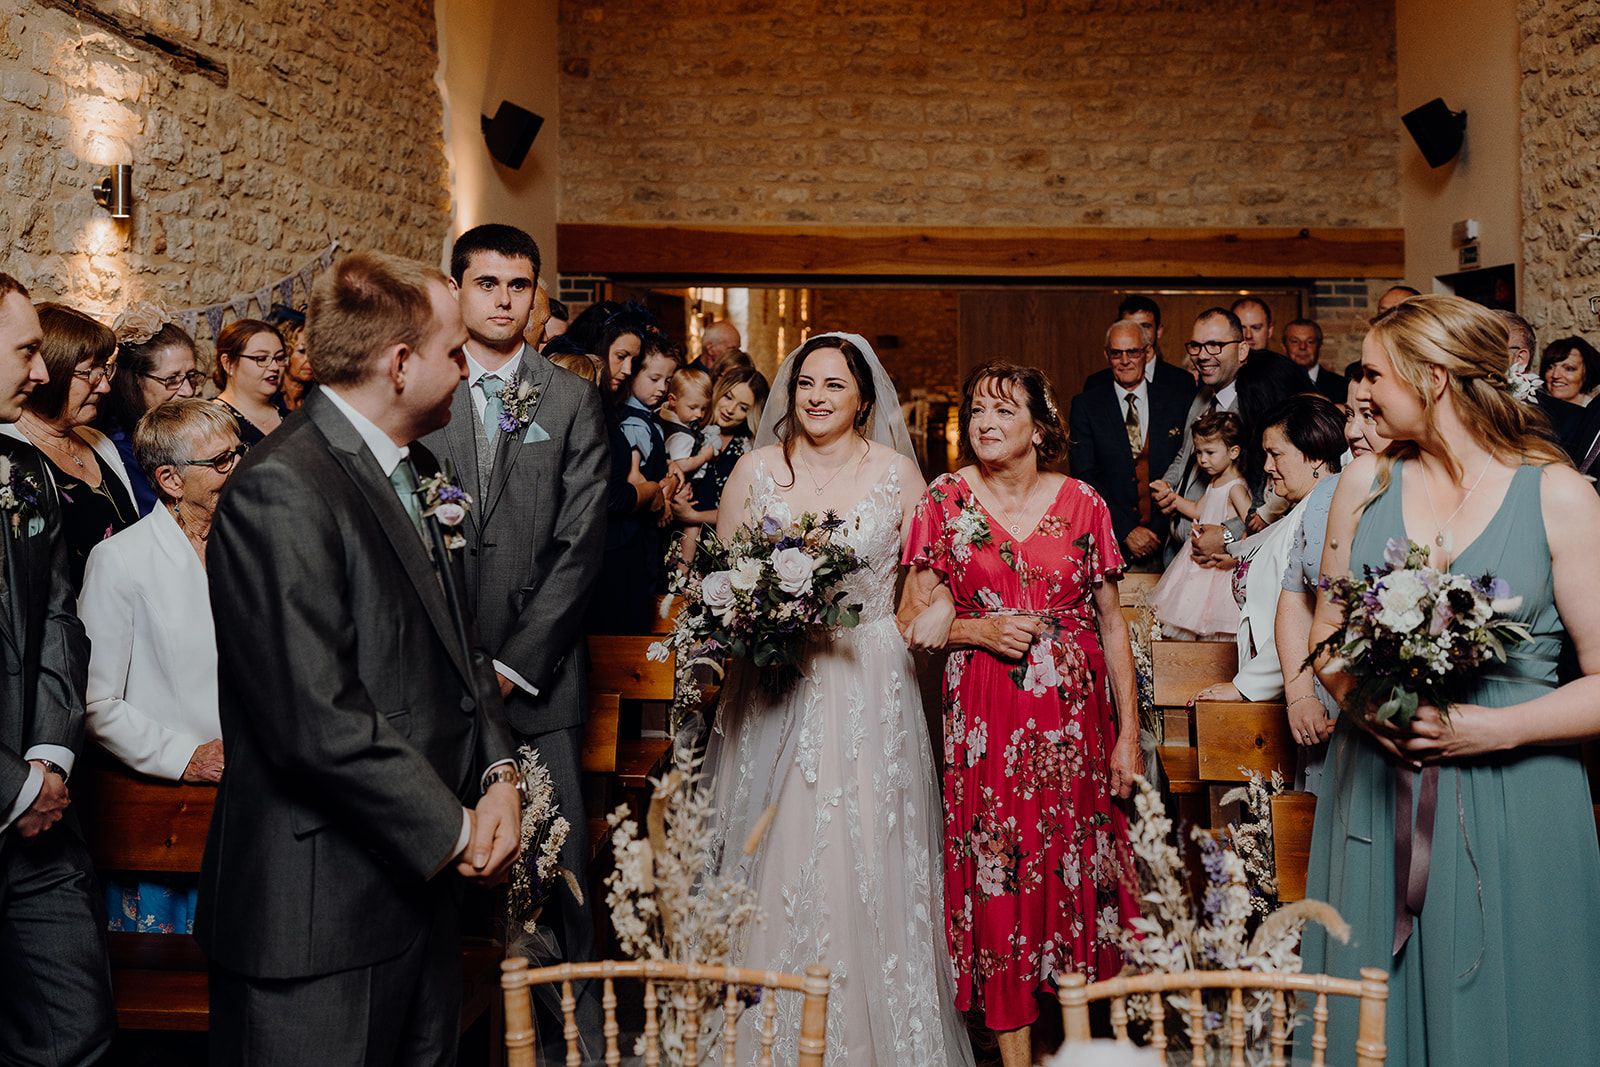 Georgie walking down the aisle with her Mum in the barn at Huntsmill Farm. Photo thanks to Sam and Steve Photography.